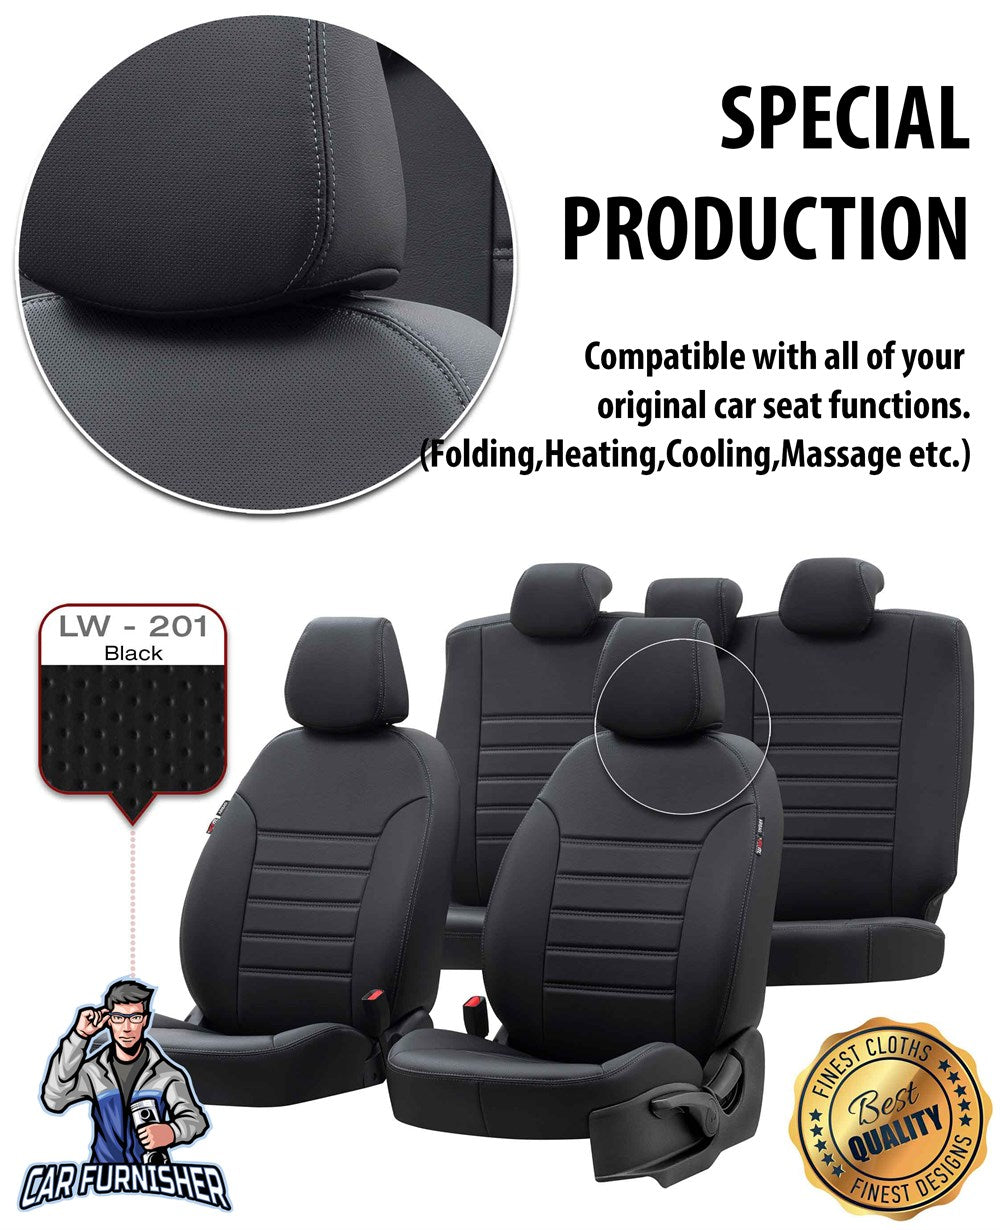 Chery Alia Seat Covers Istanbul Leather Design Beige Leather